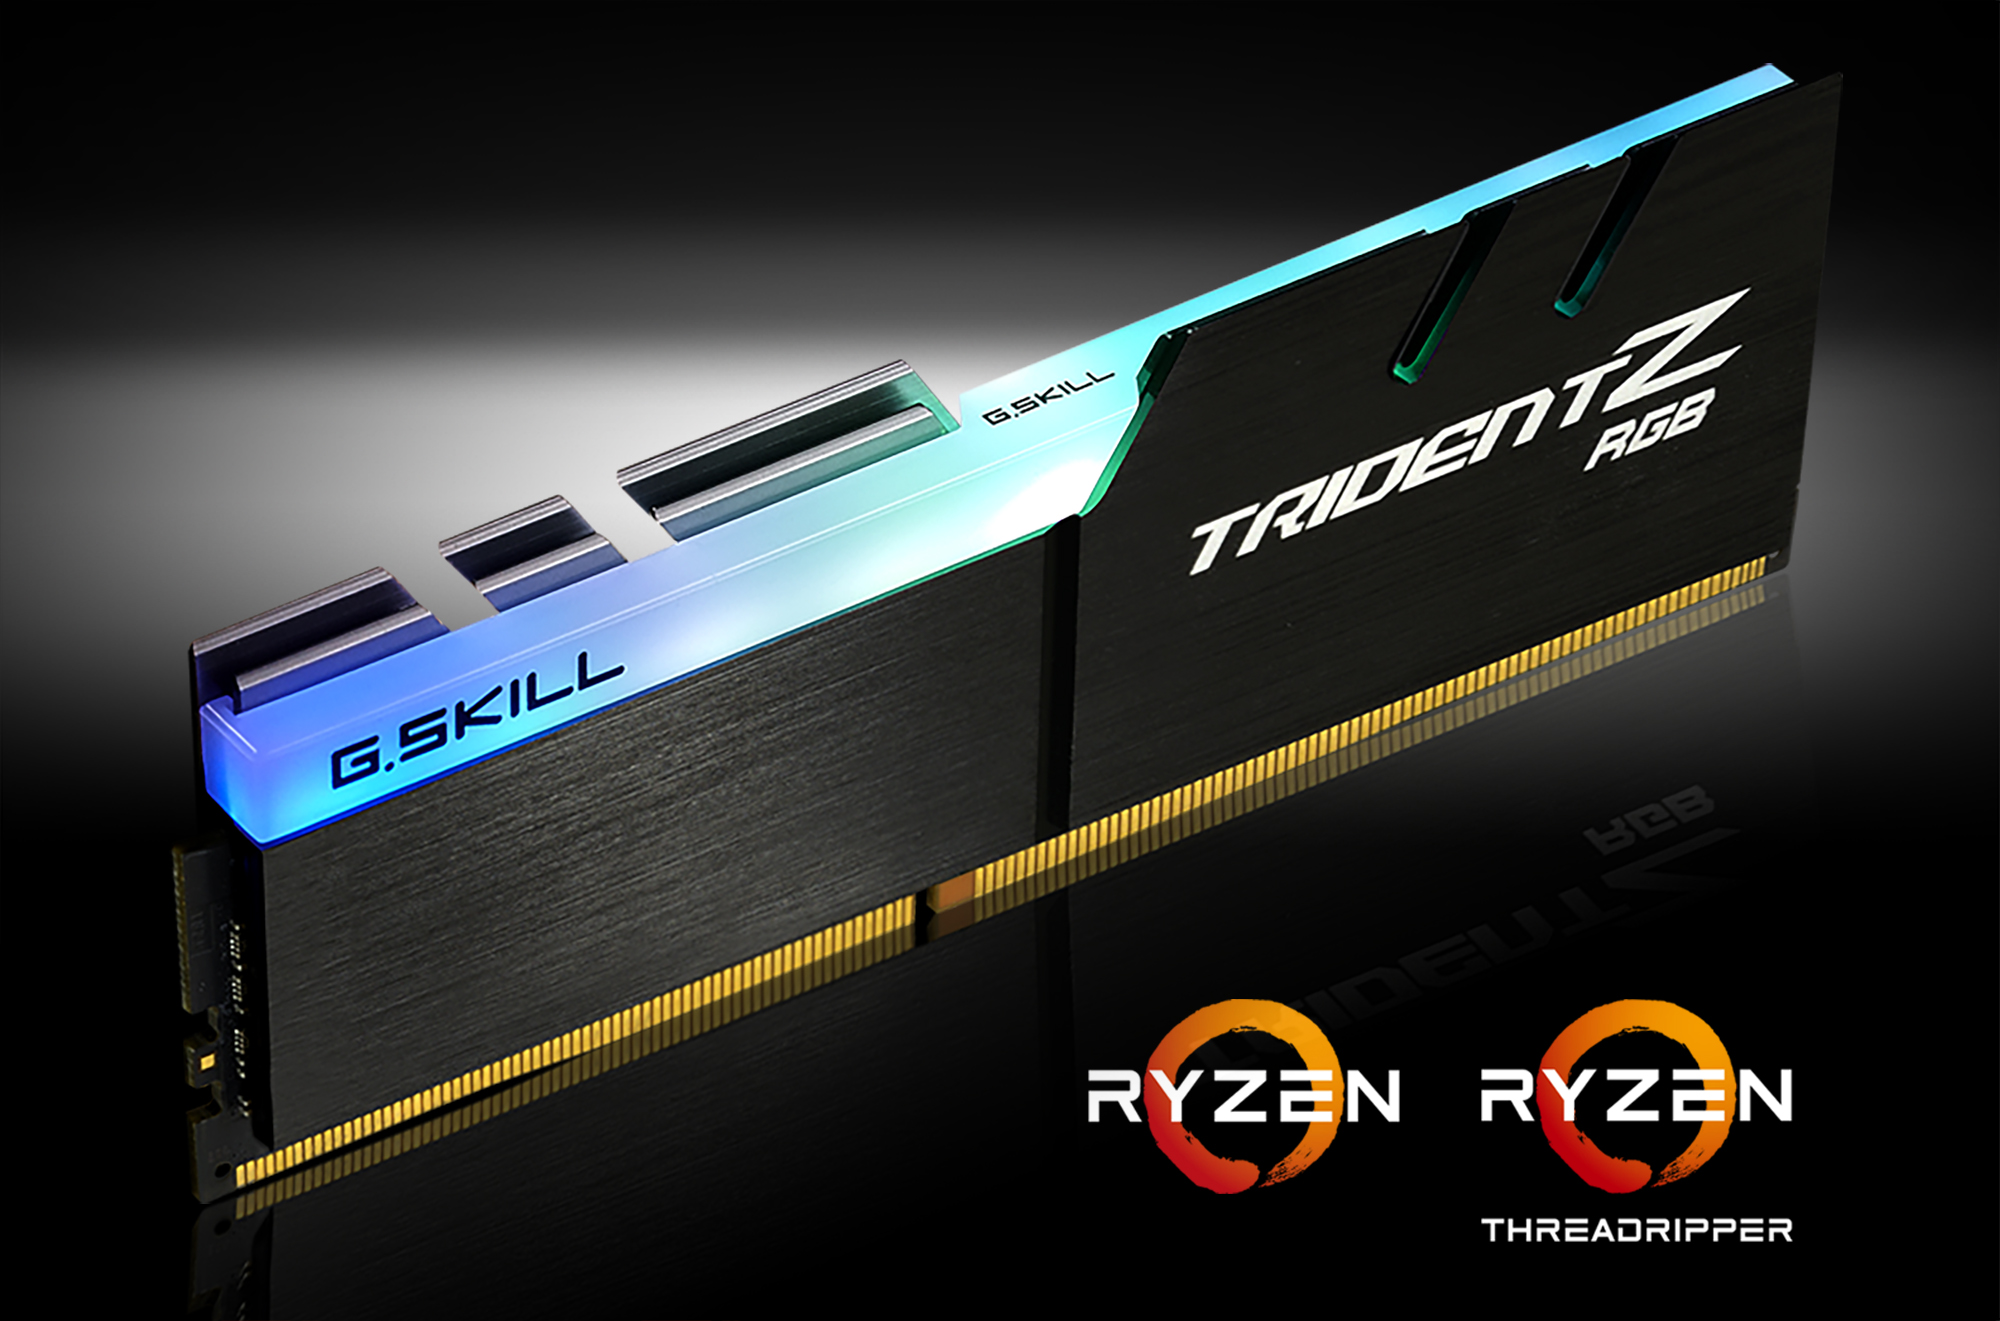 GSkill Announces New Compatible Trident Z Kits